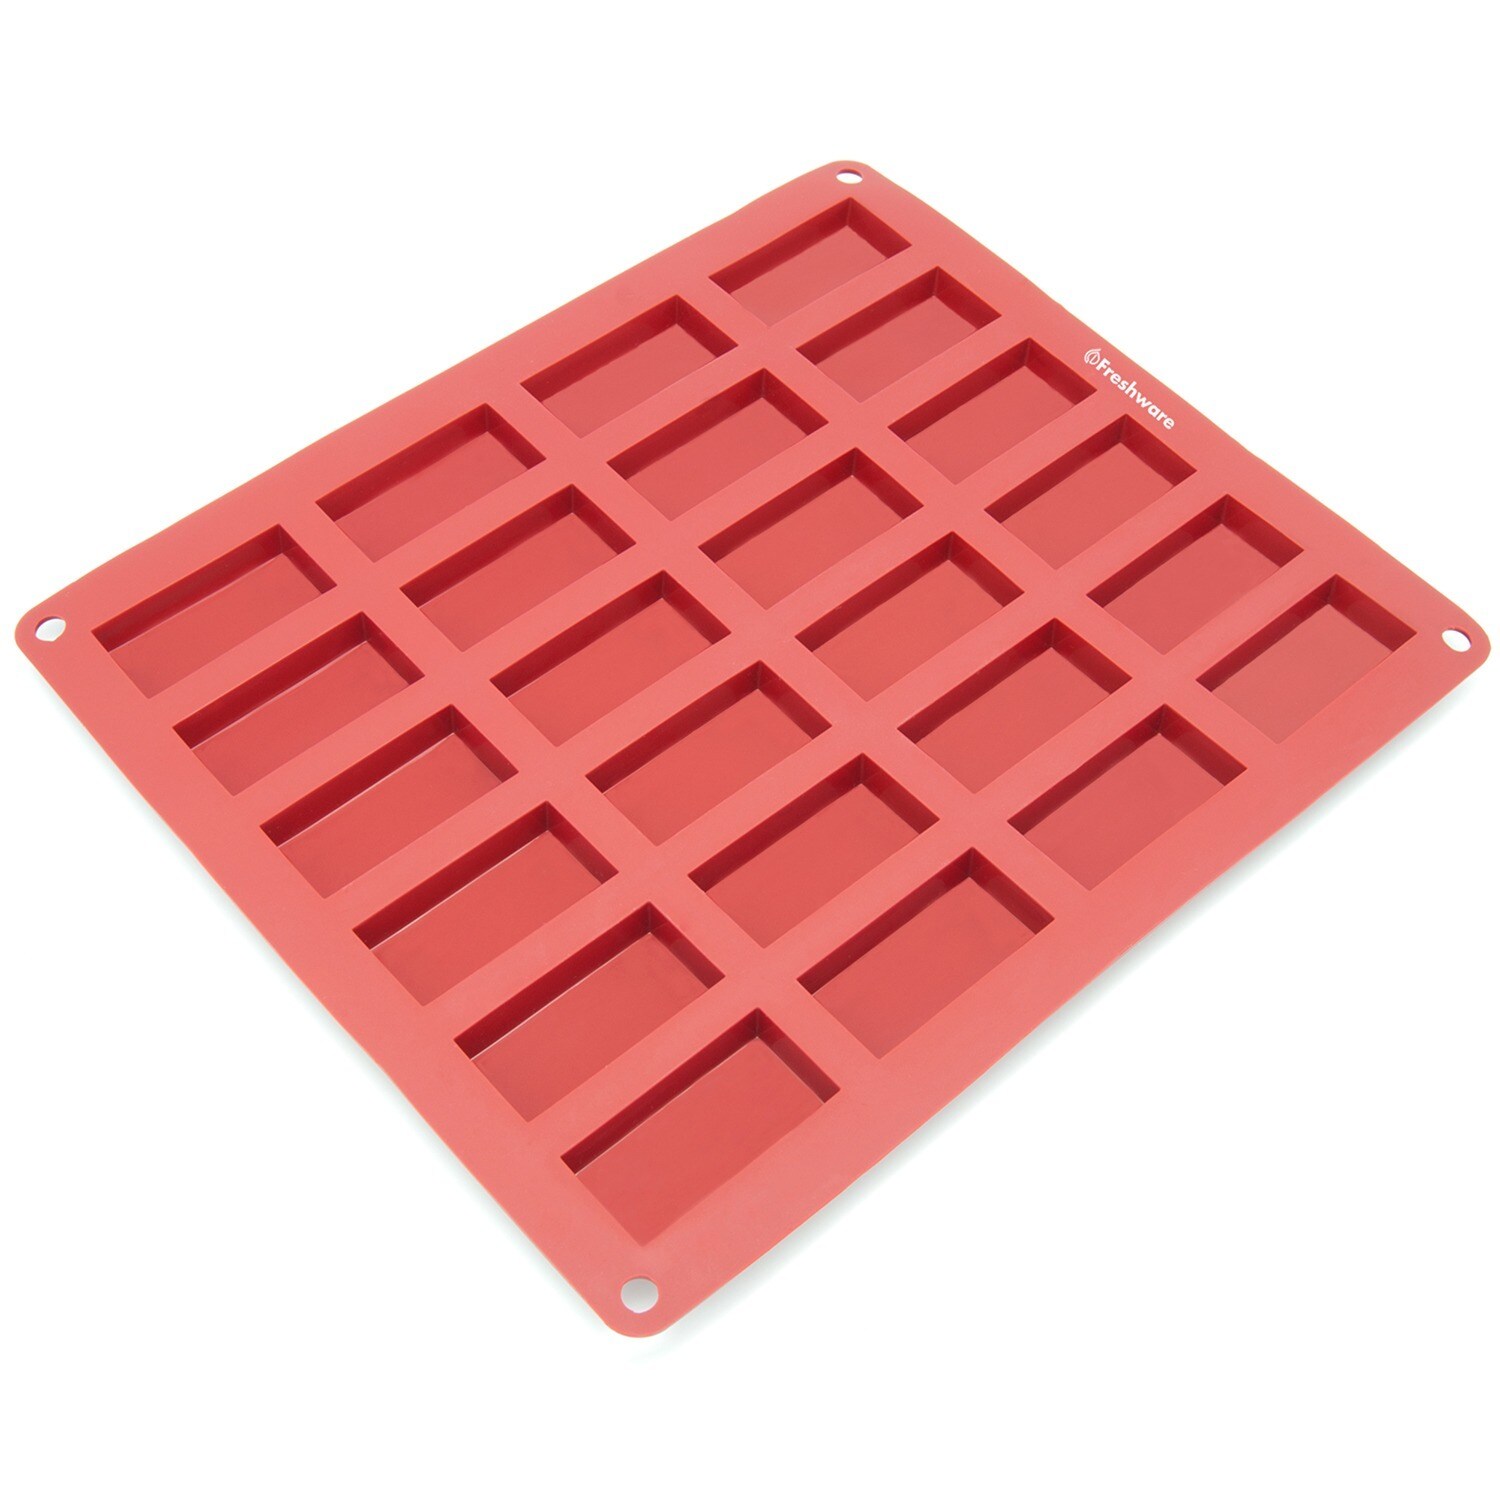 Freshware Silicone Baking Cups [24-Pack] Reusable Cupcake Liners